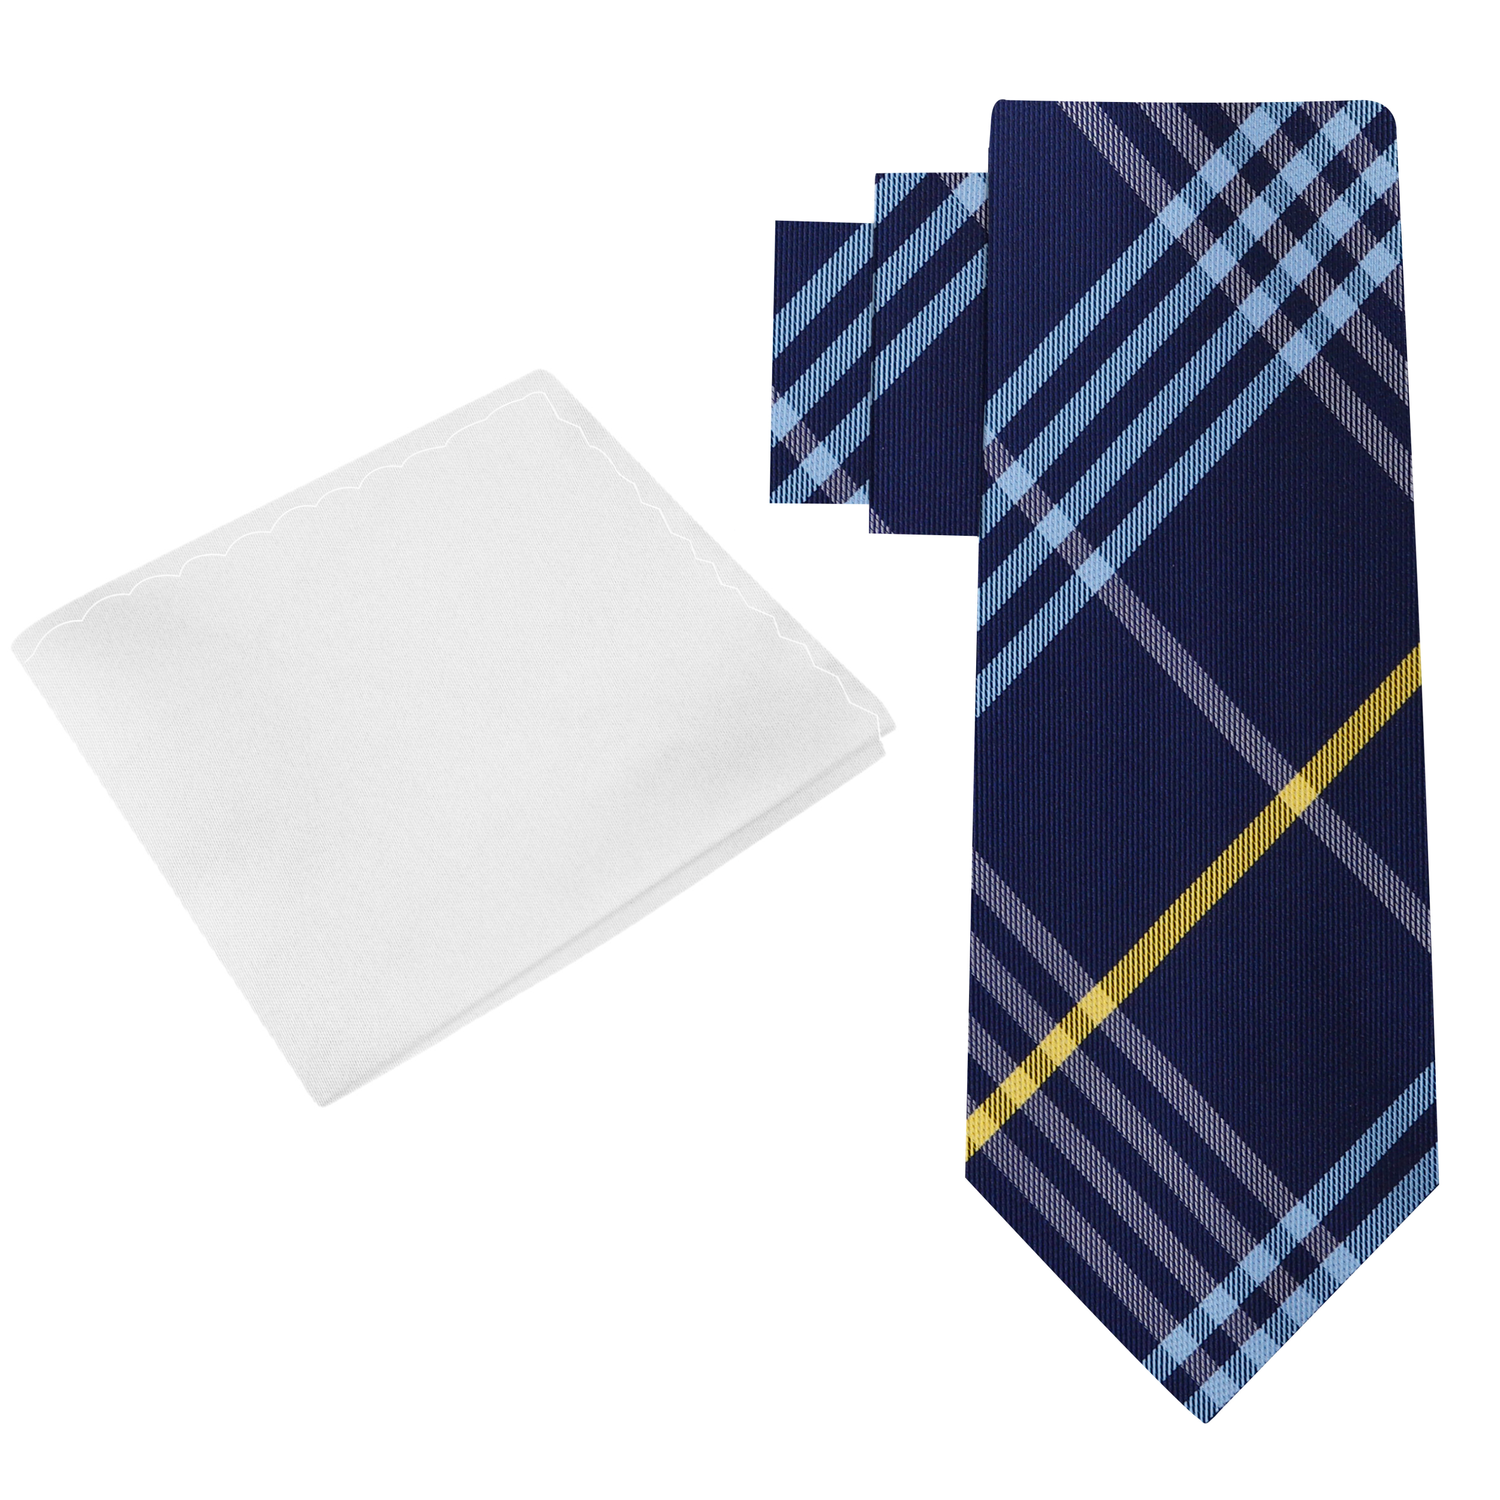 Alt View: Blue and Yellow Plaid Necktie with White Square